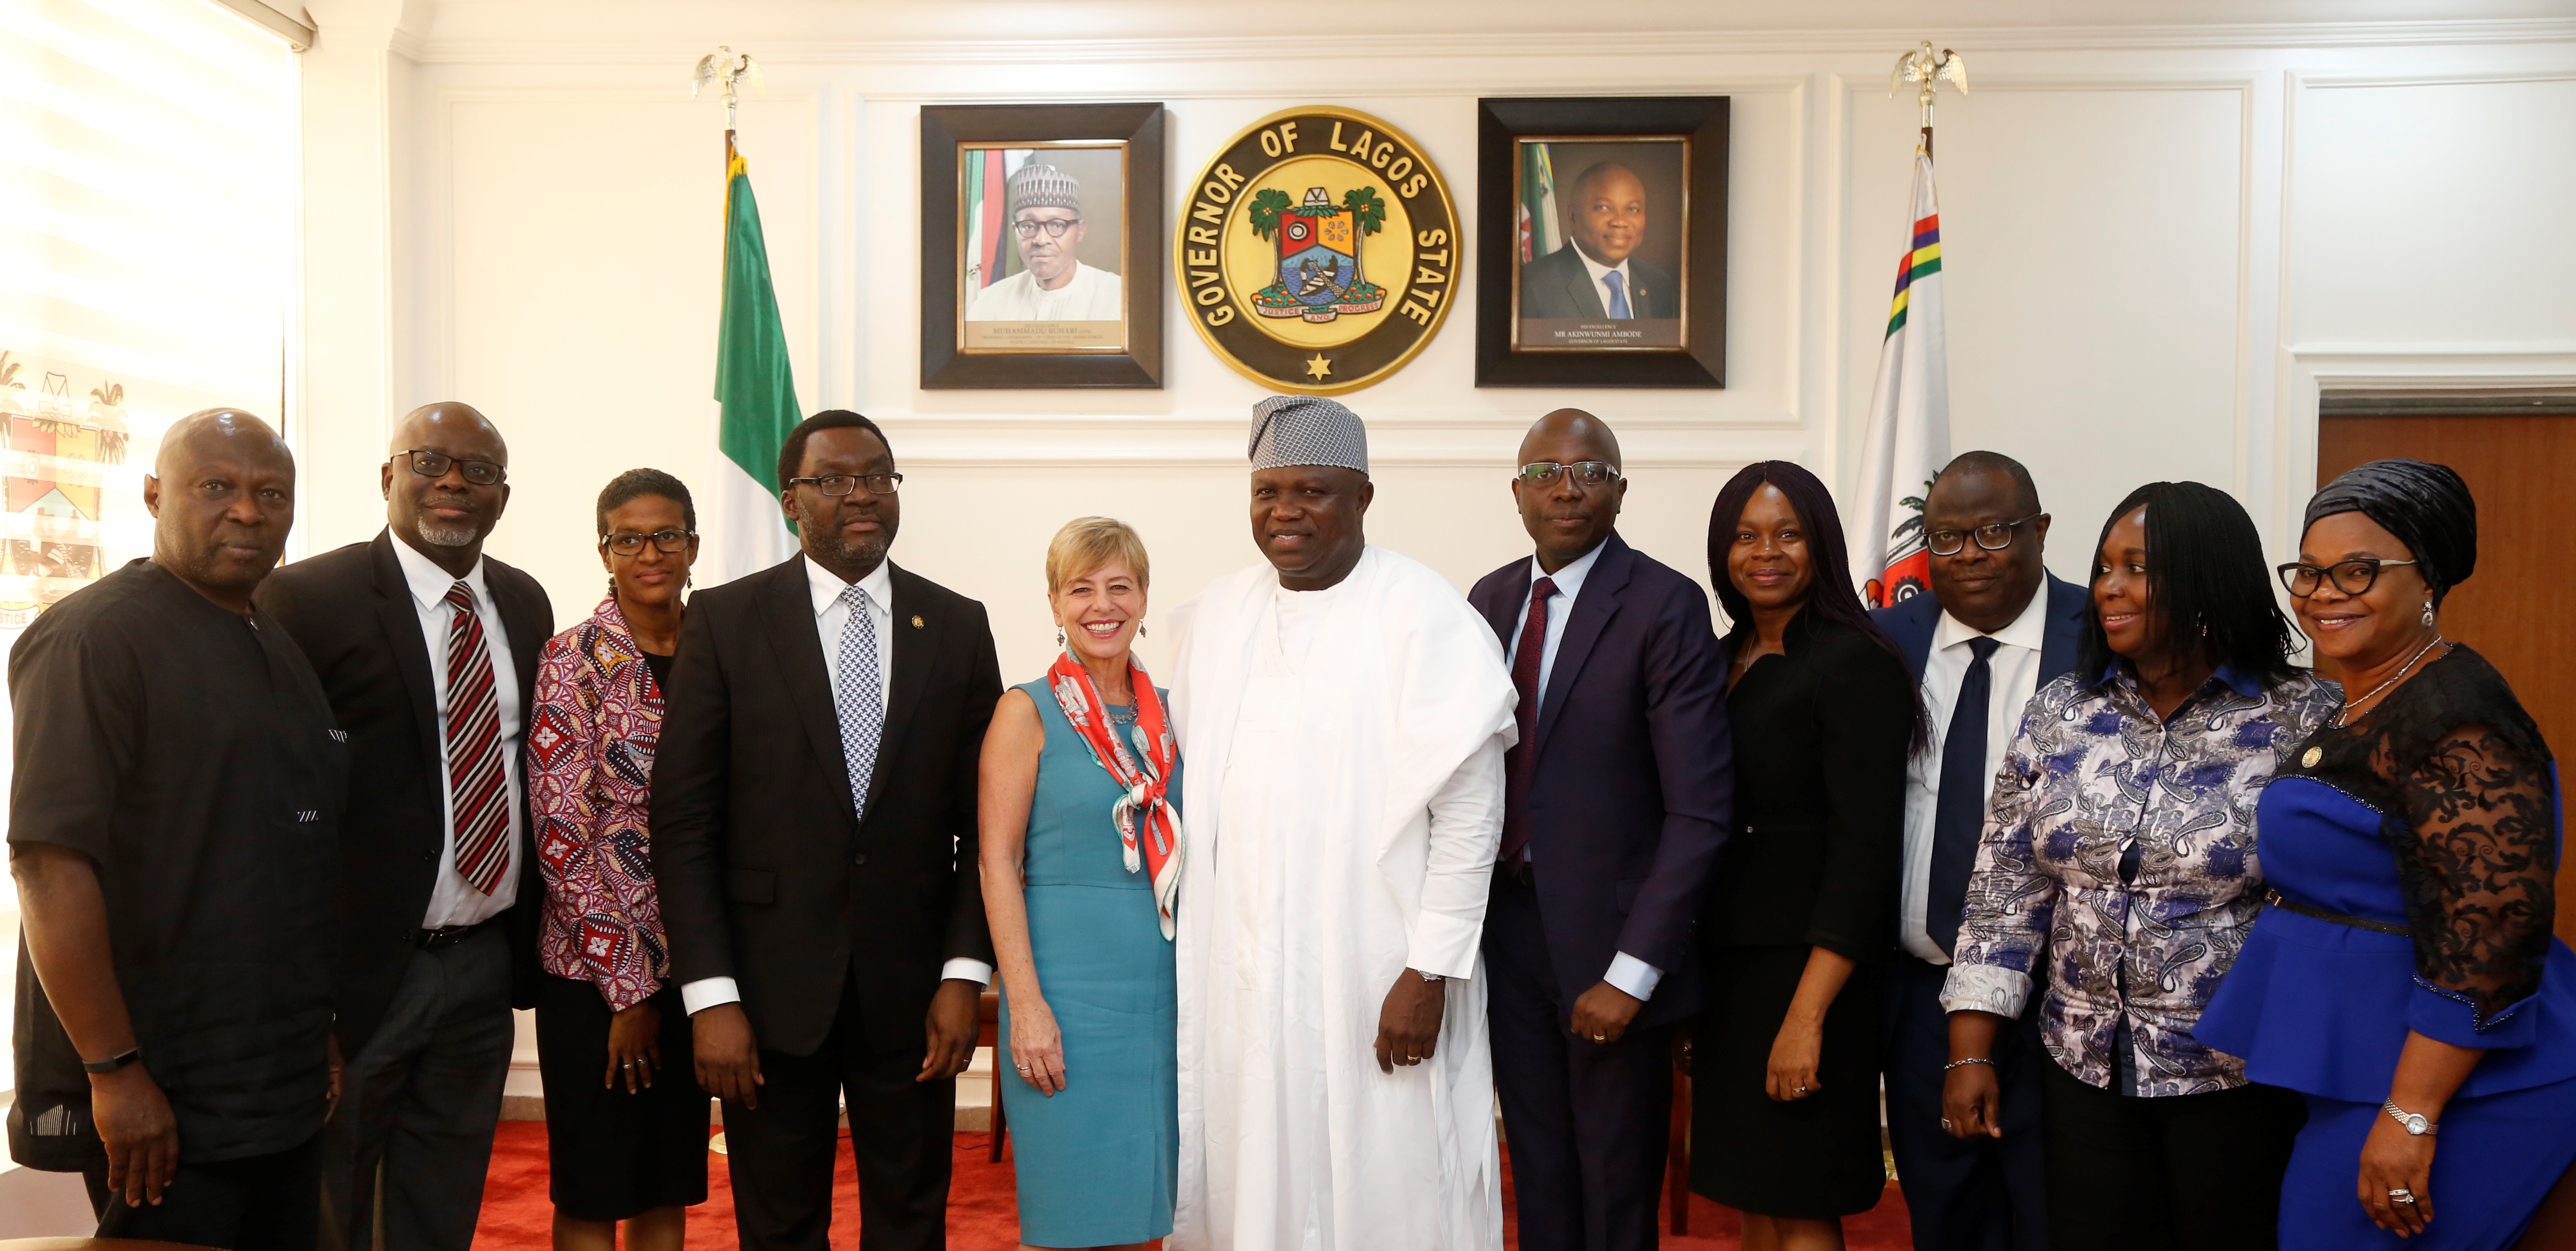 Lagos State Governor Mr. Akinwunmi Ambode (middle), with Ford Foundation Executive Vice President for Programs, Ms. Hillary Pennington (5th left); Commissioner for Tourism, Arts & Culture, Mr. Steve Ayorinde (4th left); Program Associate, Ford Foundation, Padma Ugbabe (3rd left); Program Offices, Ford Foundation, Dr. Paul Nwulu (2nd left); Commissioner for Works & Infrastructure, Engr. Ade Akinsanya (left); Commissioner for Finance, Mr. Akinyemi Ashade (5th right); Program Offices, Ford Foundation, Eva Kouka (4th right); Commissioner for Economic Planning & Budget, Mr. Segun Banjo (3rd right);  Program Assistant, Ford Foundation, Joy Ehinor-Esezobor (2nd right) and Special Adviser to the Governor on Tourism, Arts & Culture, Mrs. Aramide Giwanson (right) during the courtesy visit to the Governor by the Ford Foundation Executive Vice President for Programs, at the Lagos House, Alausa, Ikeja, on Monday, February 19, 2018.  